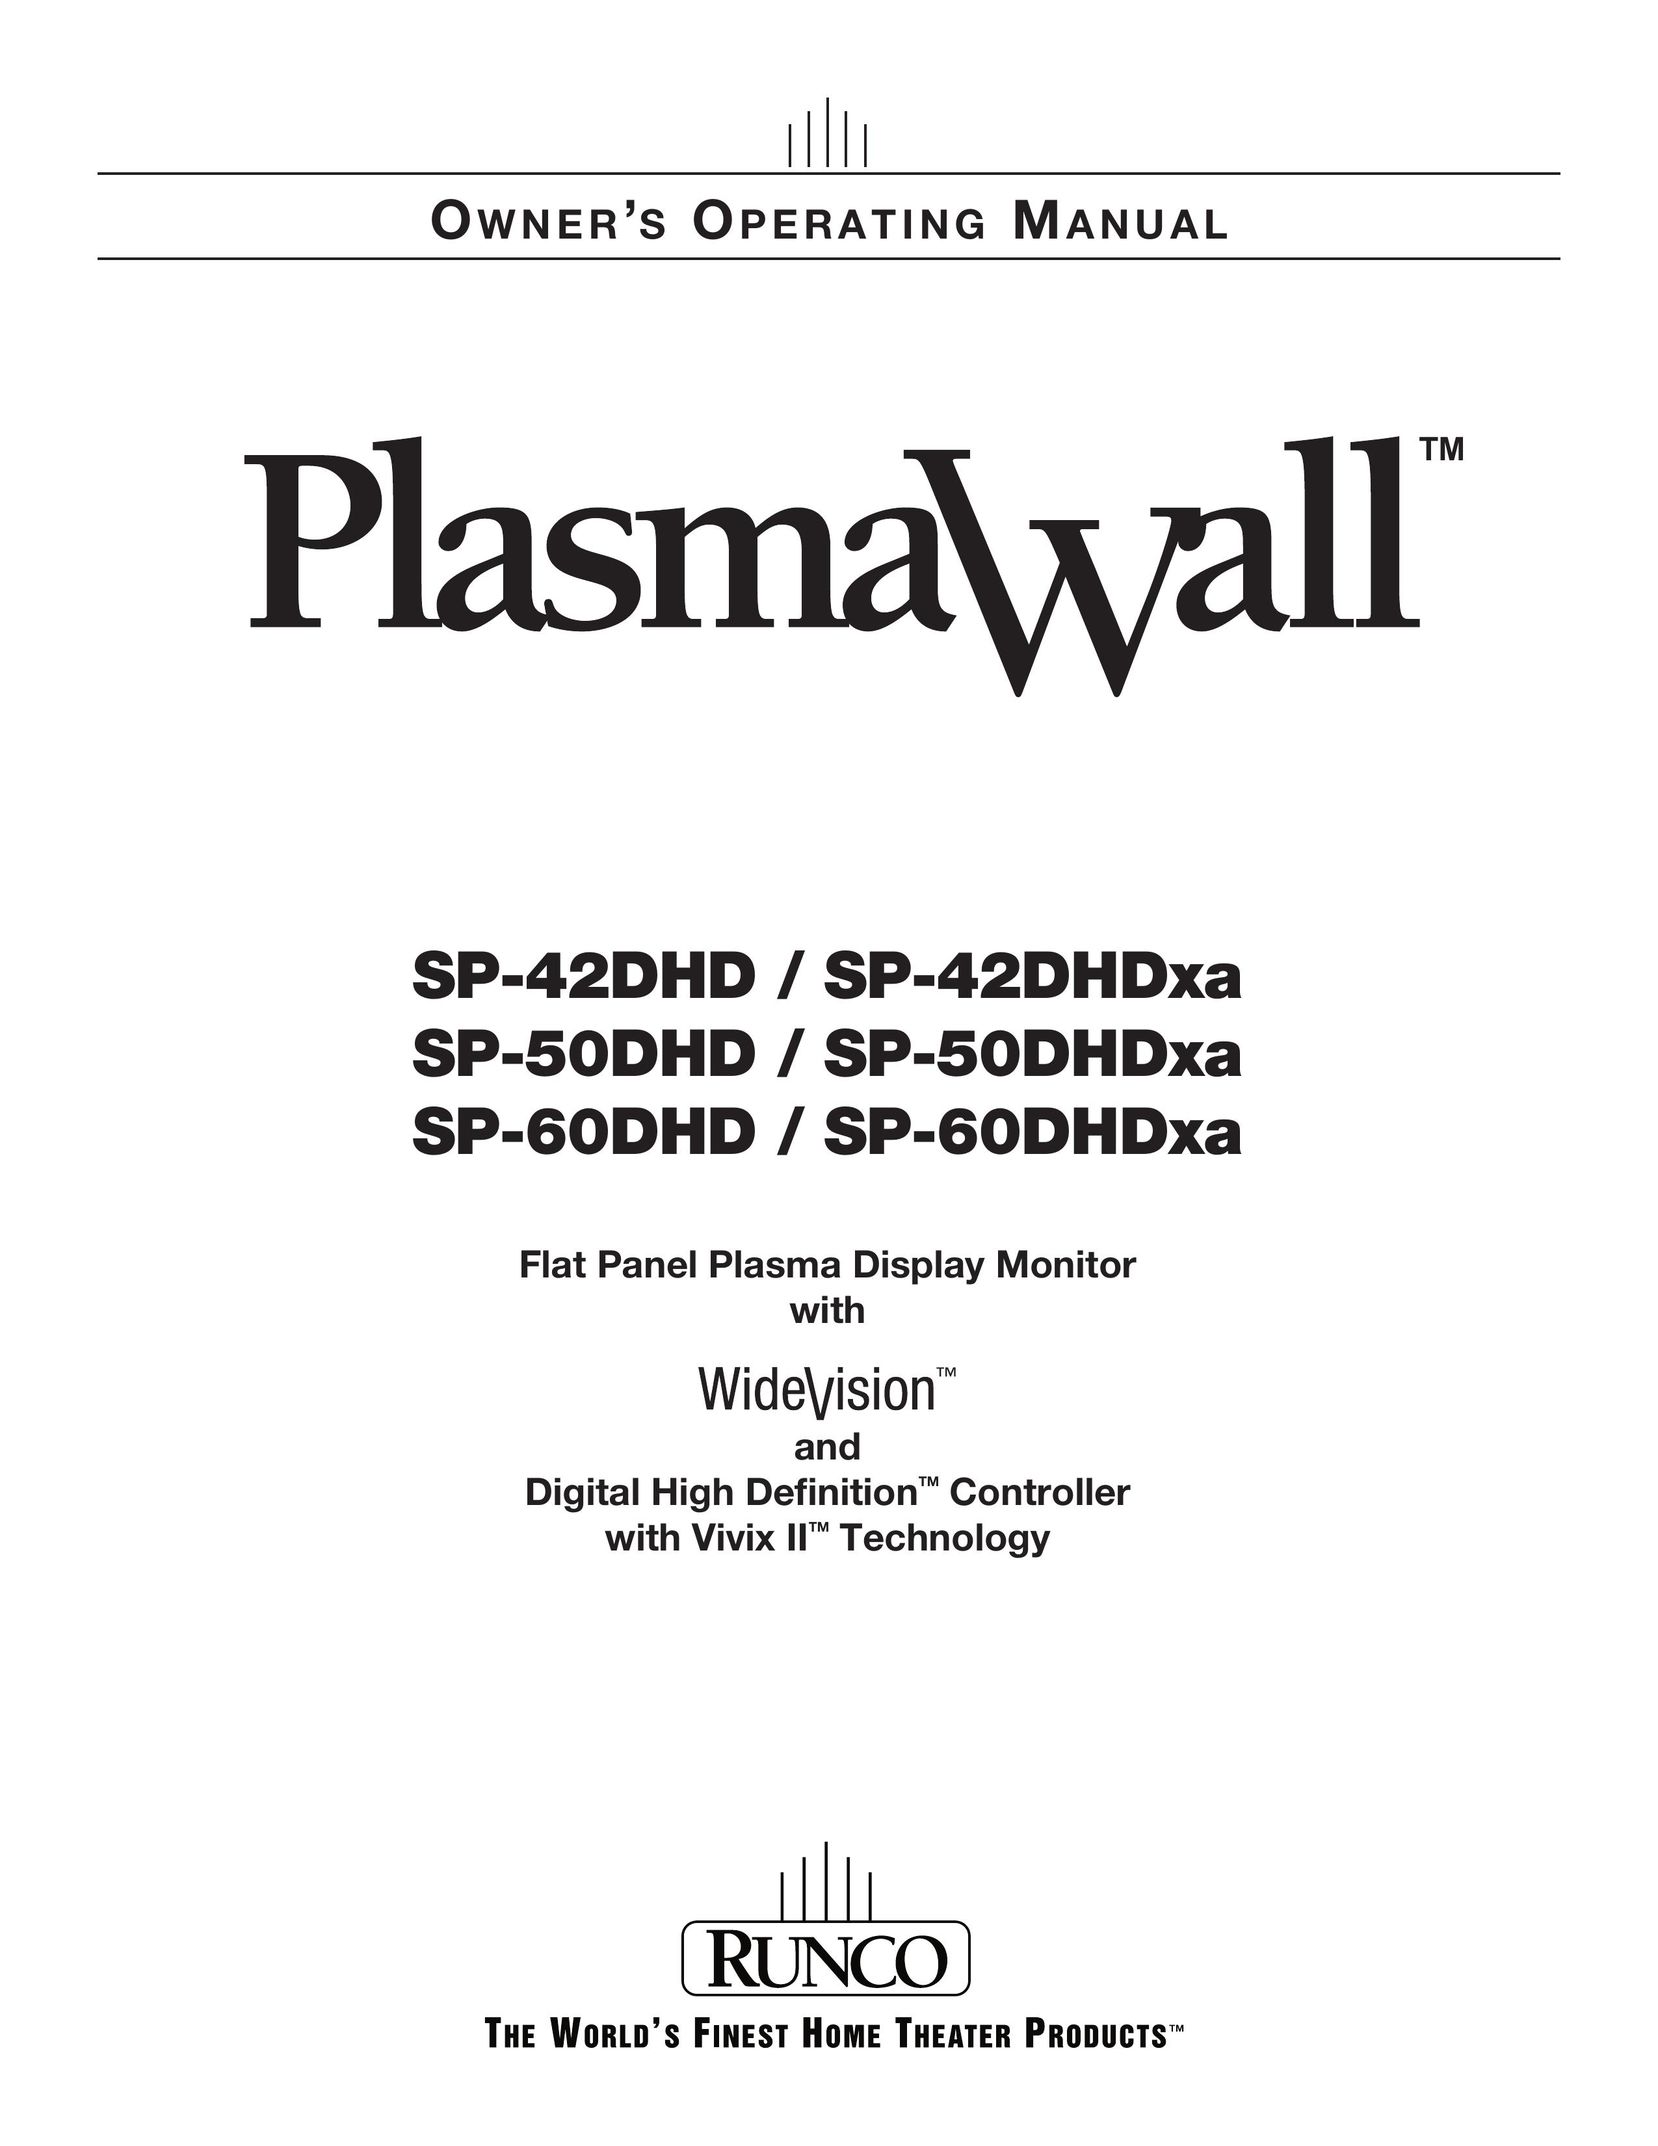 Runco SP-60DHD / SP-60DHDXA Flat Panel Television User Manual